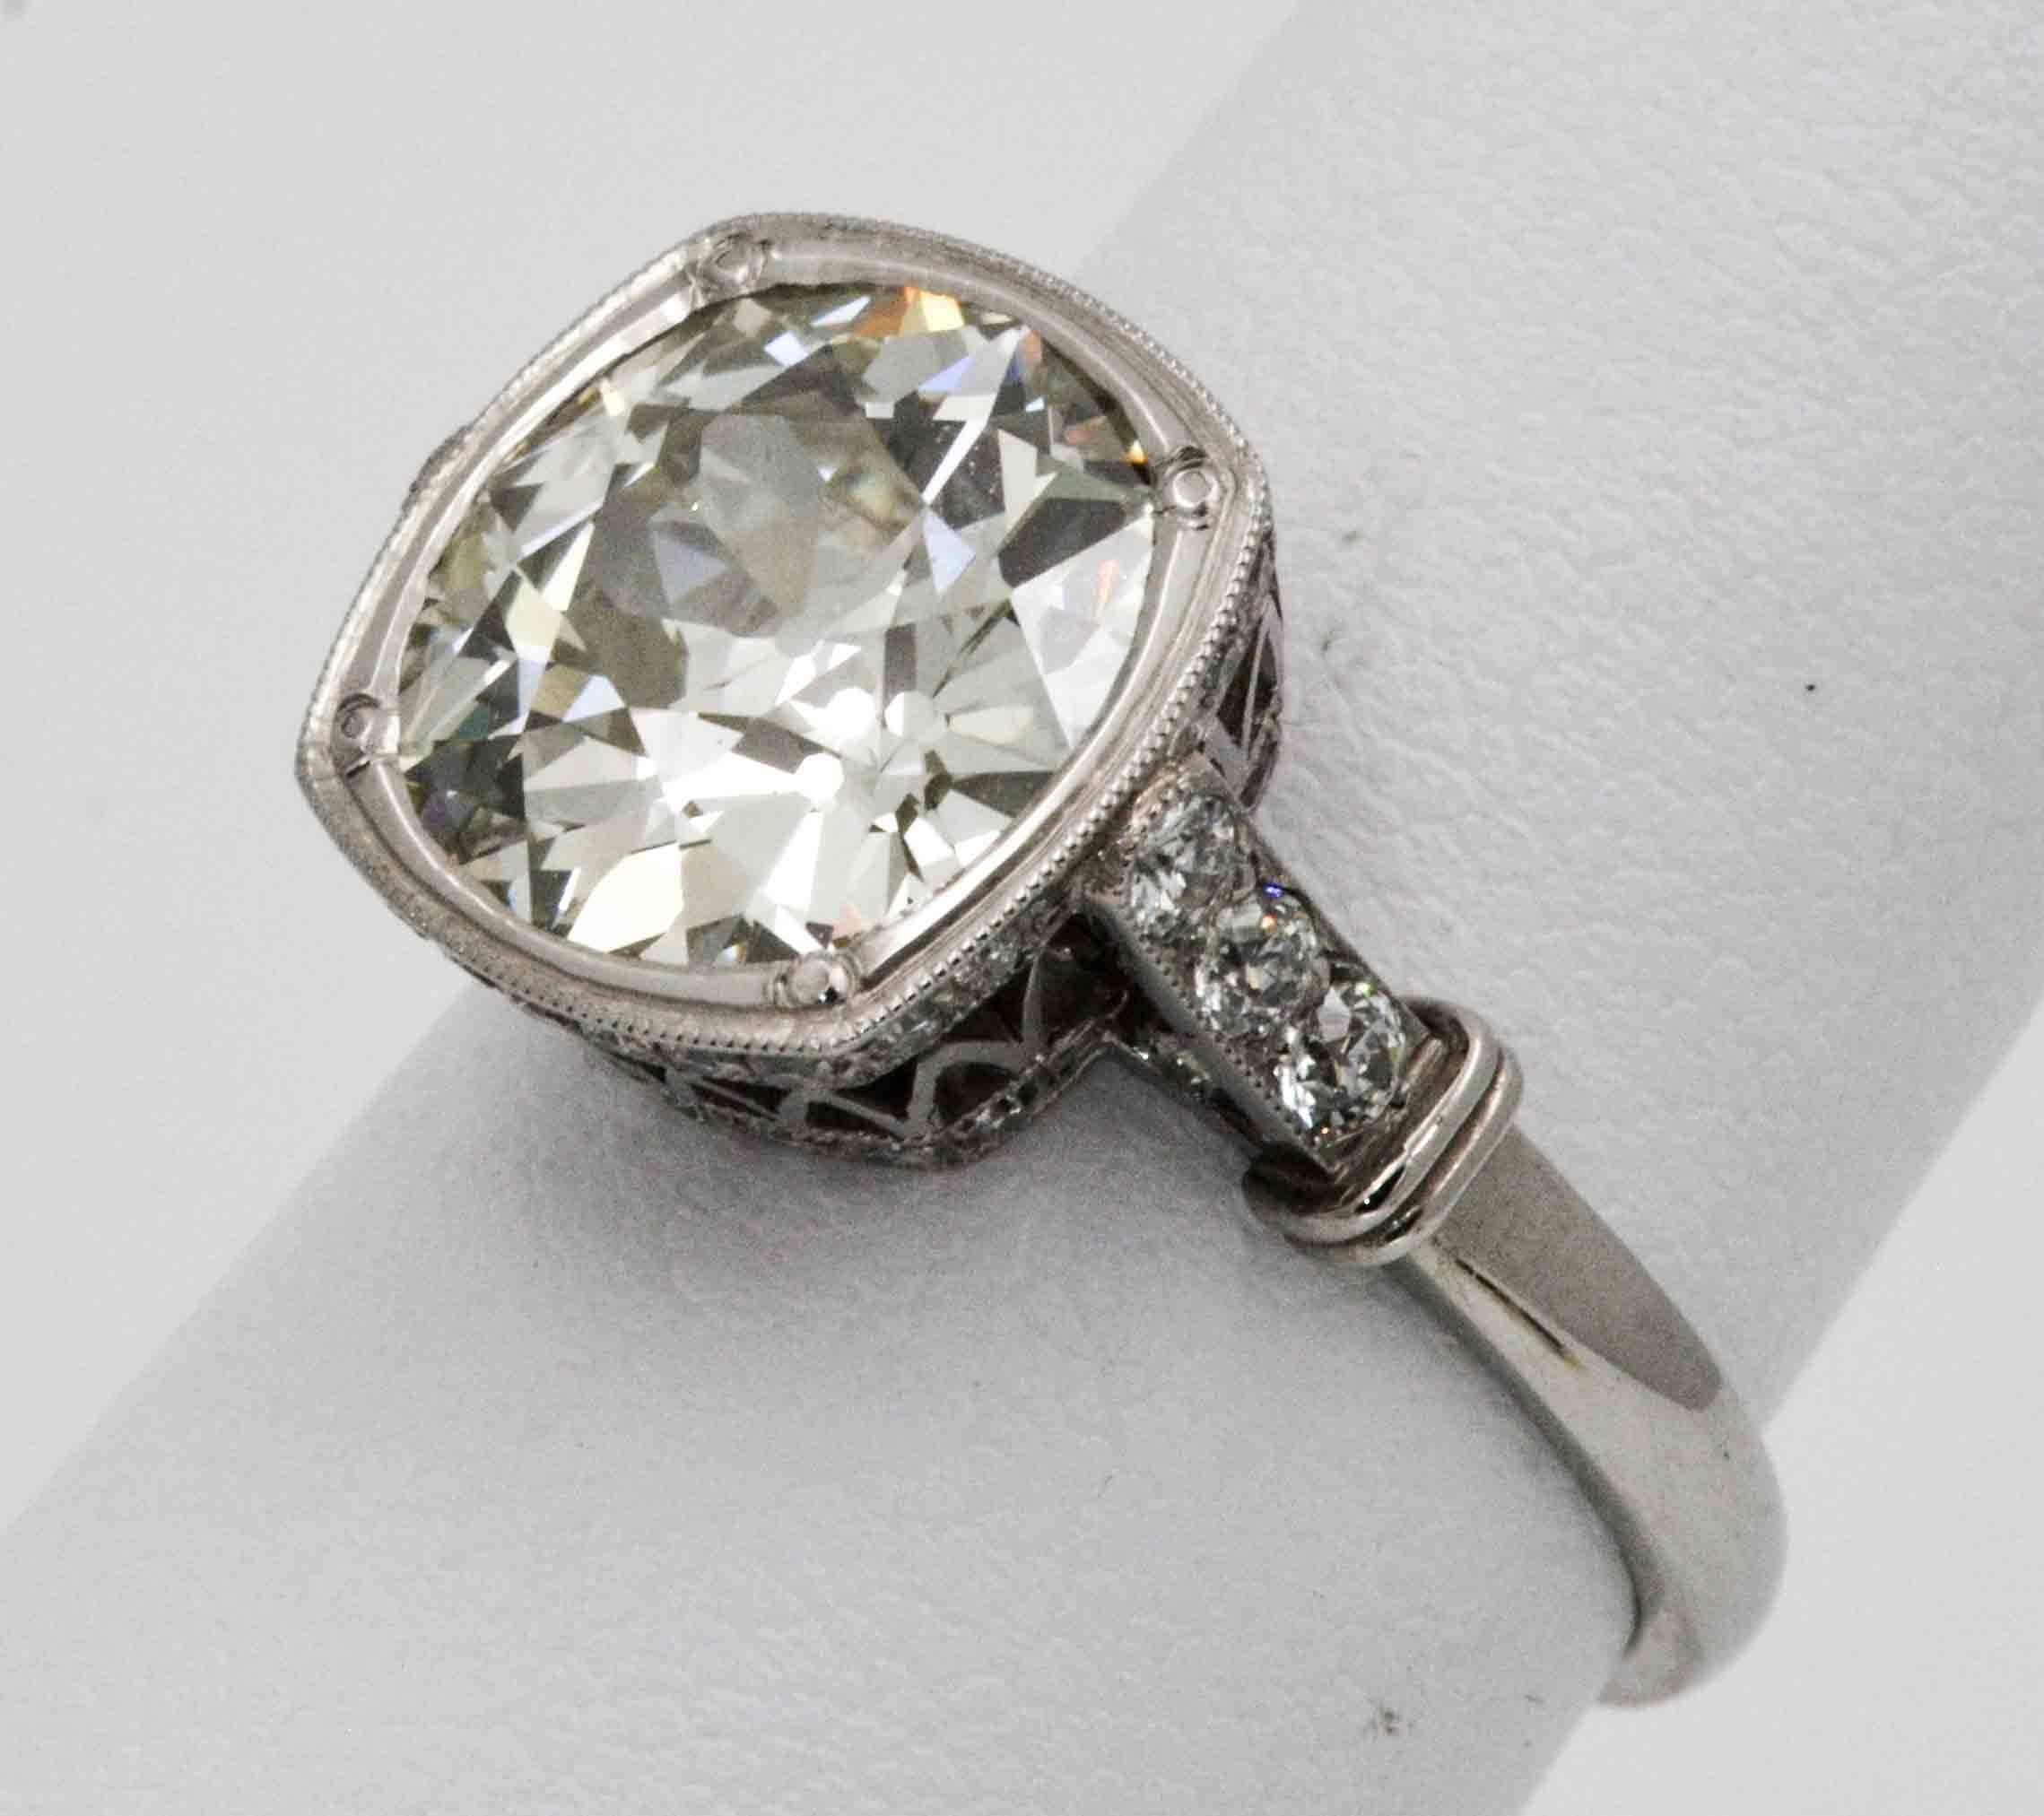 The drama of the Art Deco era comes to life in this newly created 1920's European cut diamond ring. The intricate platinum lattice crown work holding this old 3.86 ct European cut diamond (K color VS2 clarity, no certificate) was created by Single